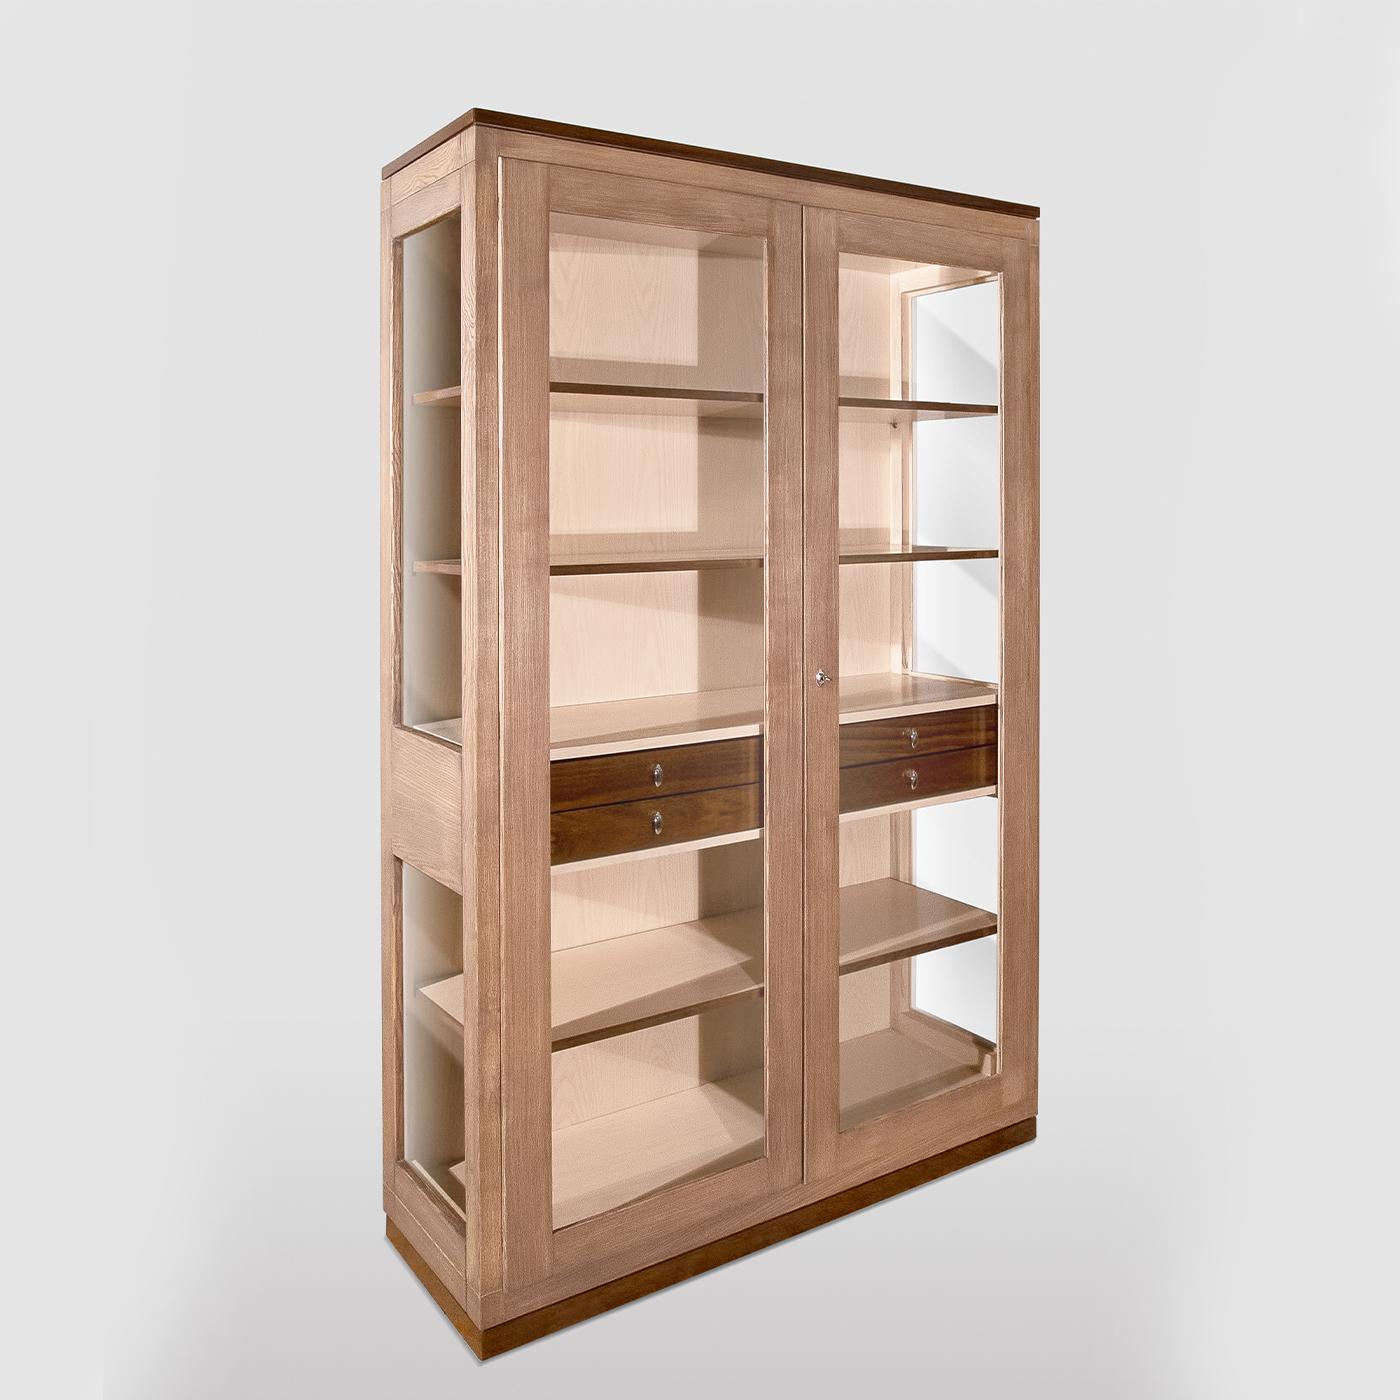 This modern display cabinet, characterized by simple and linear design, is a stylish storage option for the most precious collections. It features a tall structure handcrafted of ash and solid walnut wood supported by a plinth base with leveling